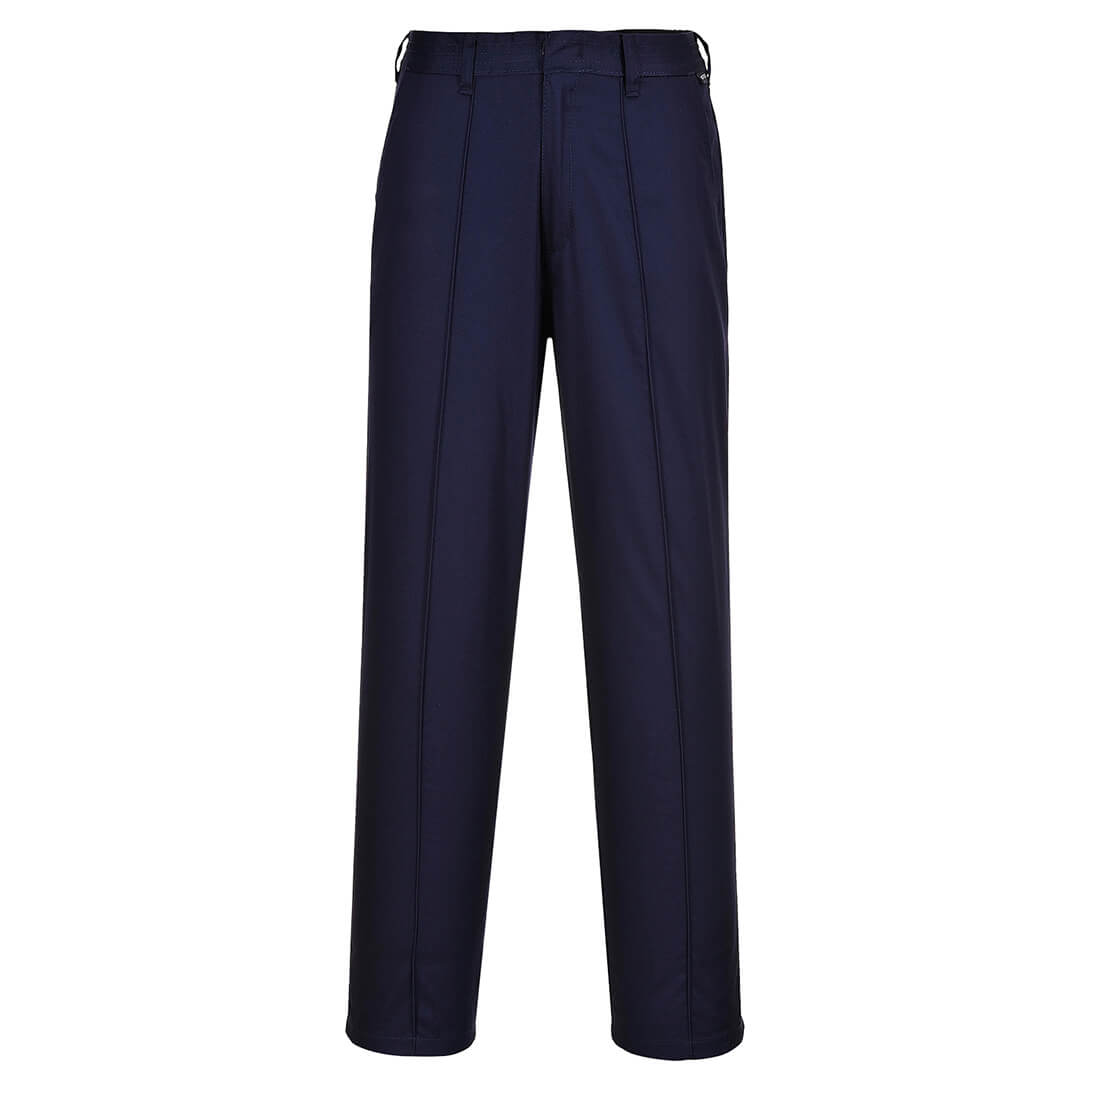 Image of Portwest LW97 ladies Elasticated Trousers Navy Blue 4XL 31"